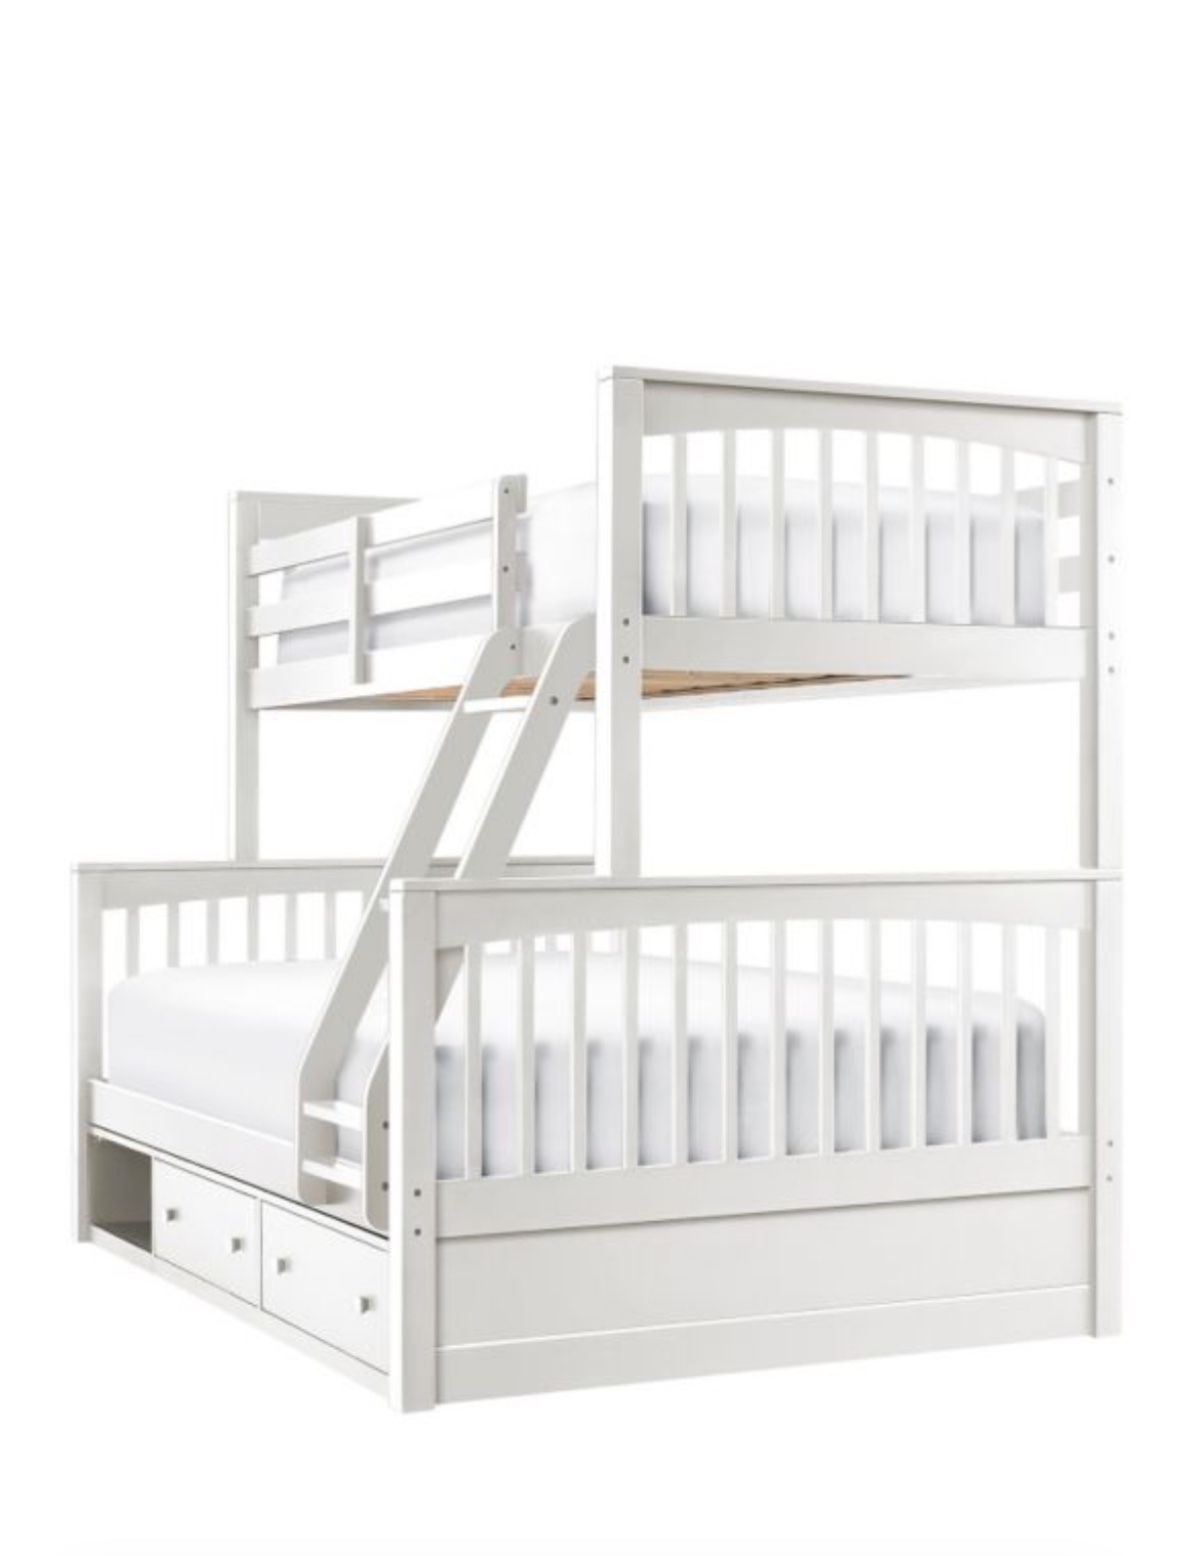 Twin Over Full Bunk Beds For Sale